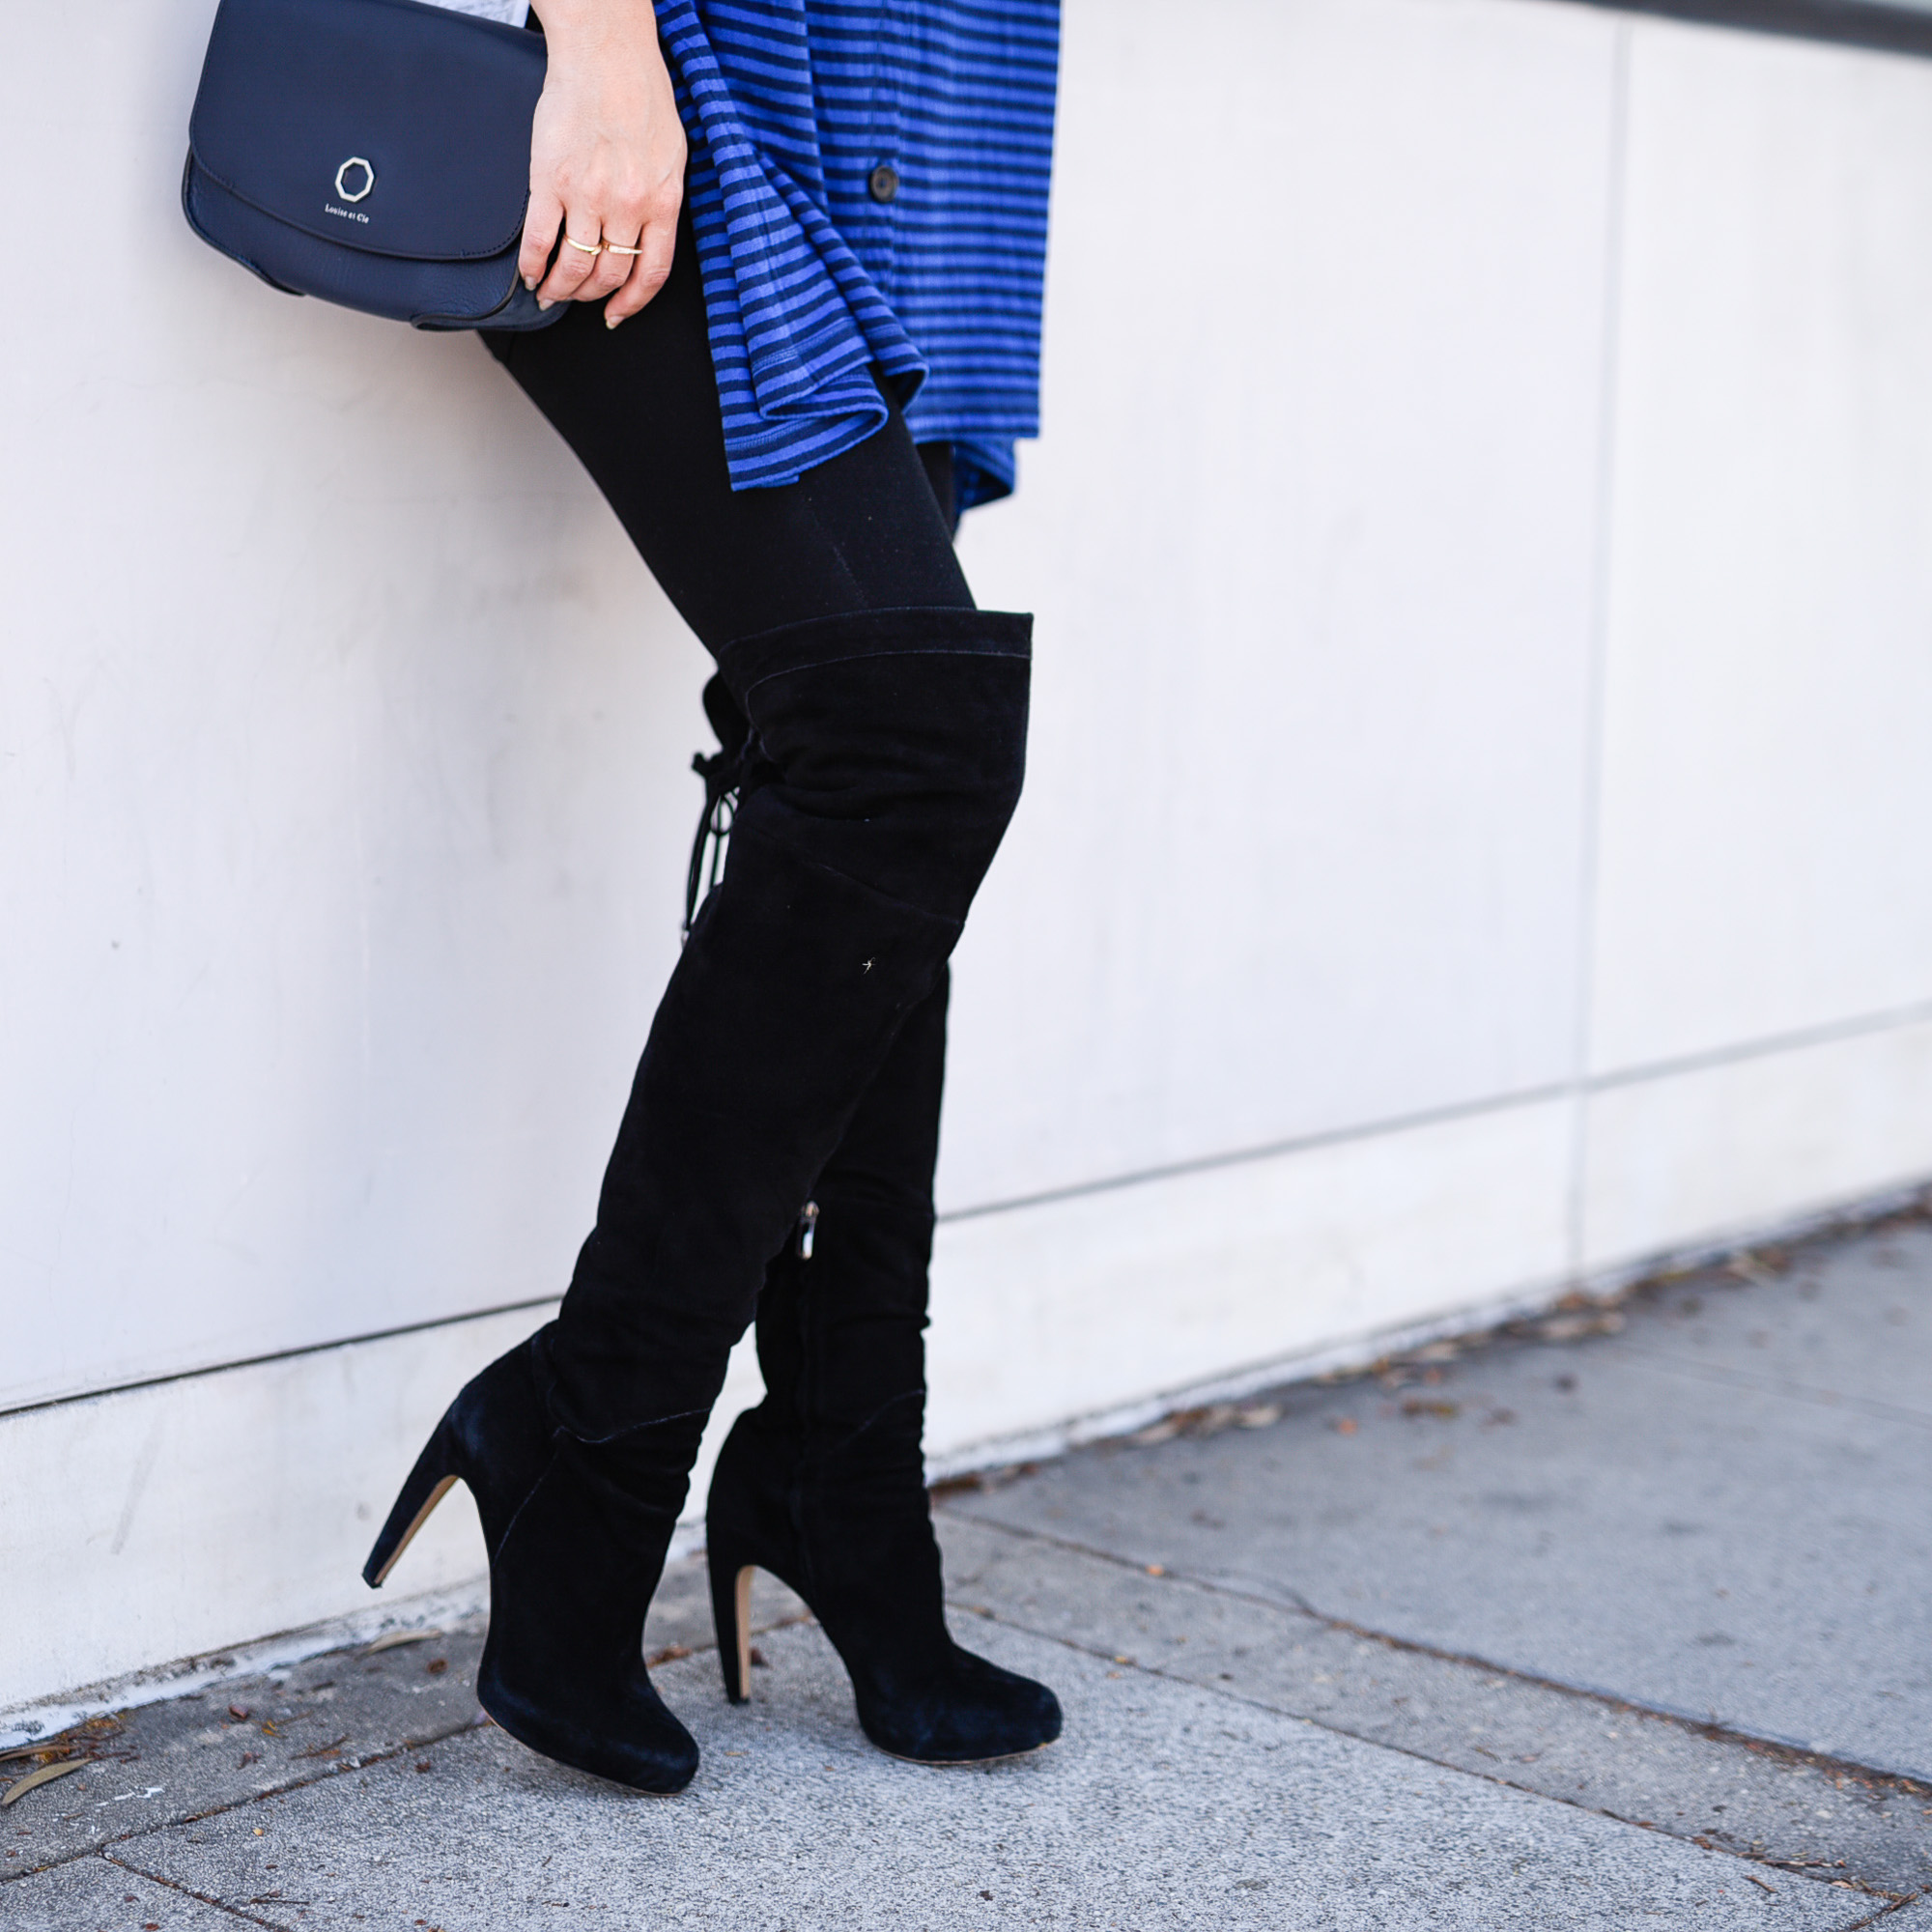 Black suede over the knee boots. 